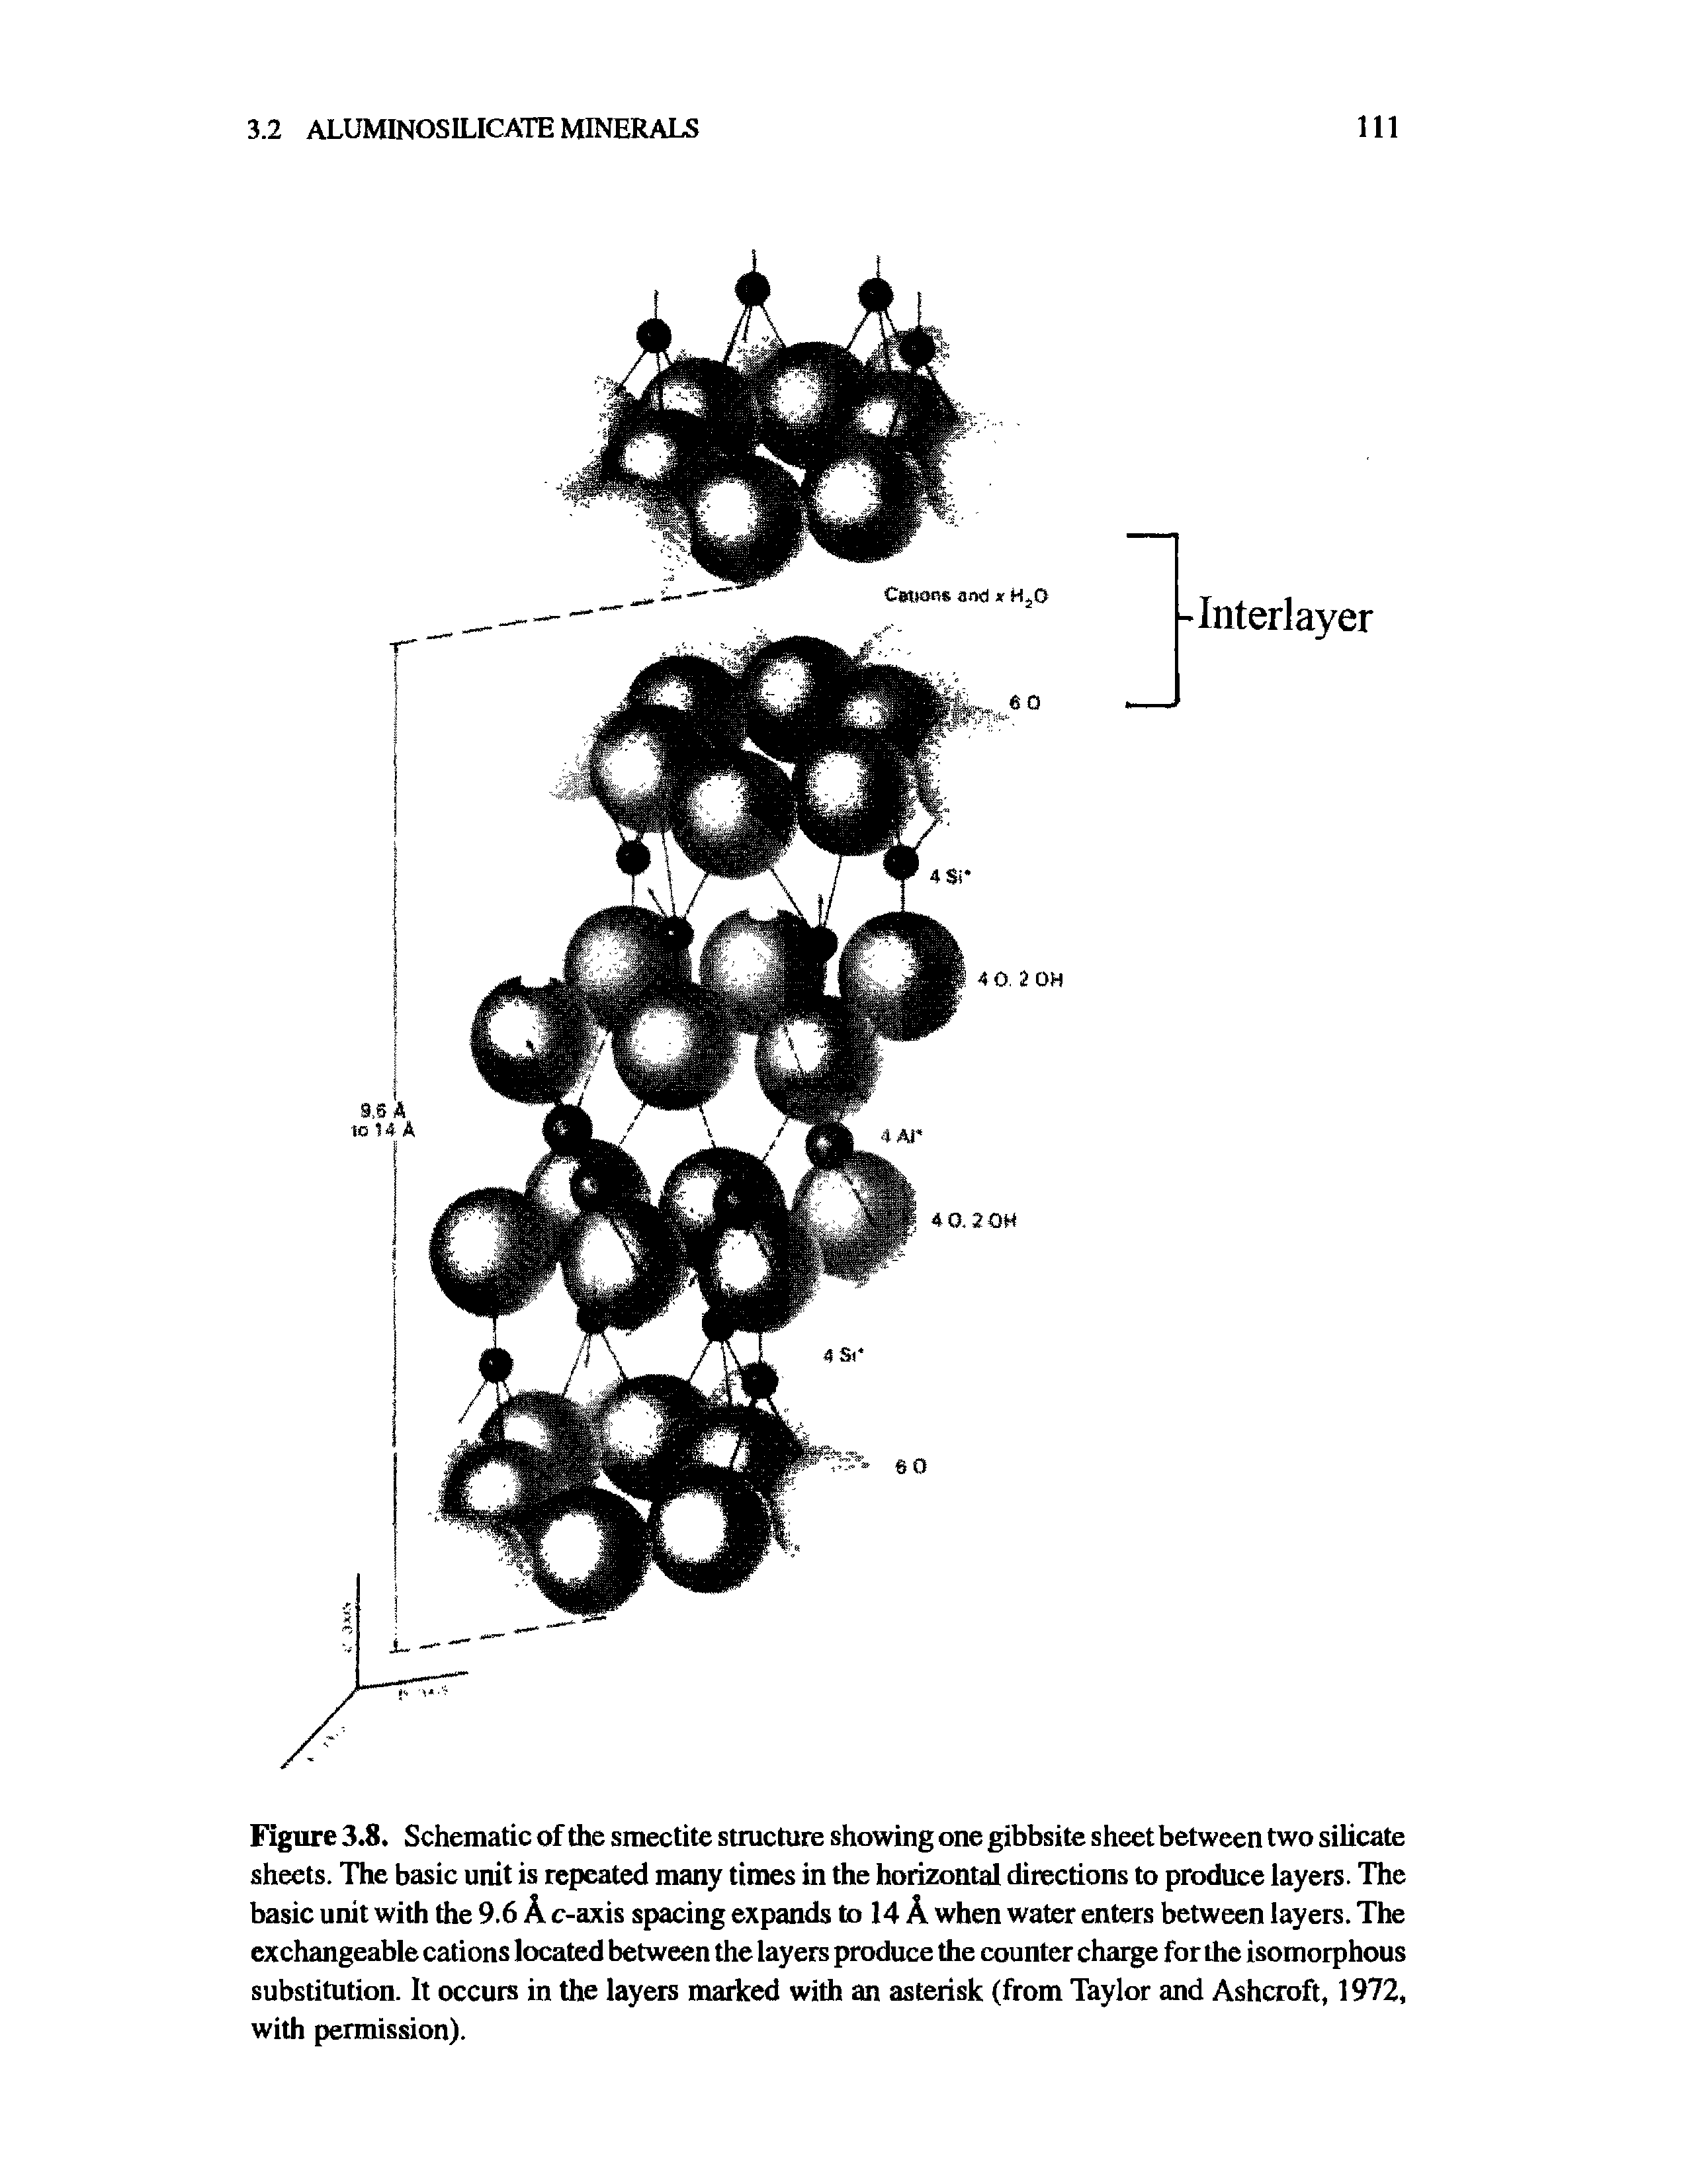 Figure 3.8. Schematic of the smectite structure showing one gibbsite sheet between two silicate sheets. The basic unit is repeated many times in the horizontal directions to produce layers. The basic unit with the 9.6 A c-axis spacing expands to 14 A when water enters between layers. The exchangeable cations located between the layers produce the counter charge for the isomorphous substitution. It occurs in the layers marked with an asterisk (from Taylor and Ashcroft, 1972, with permission).